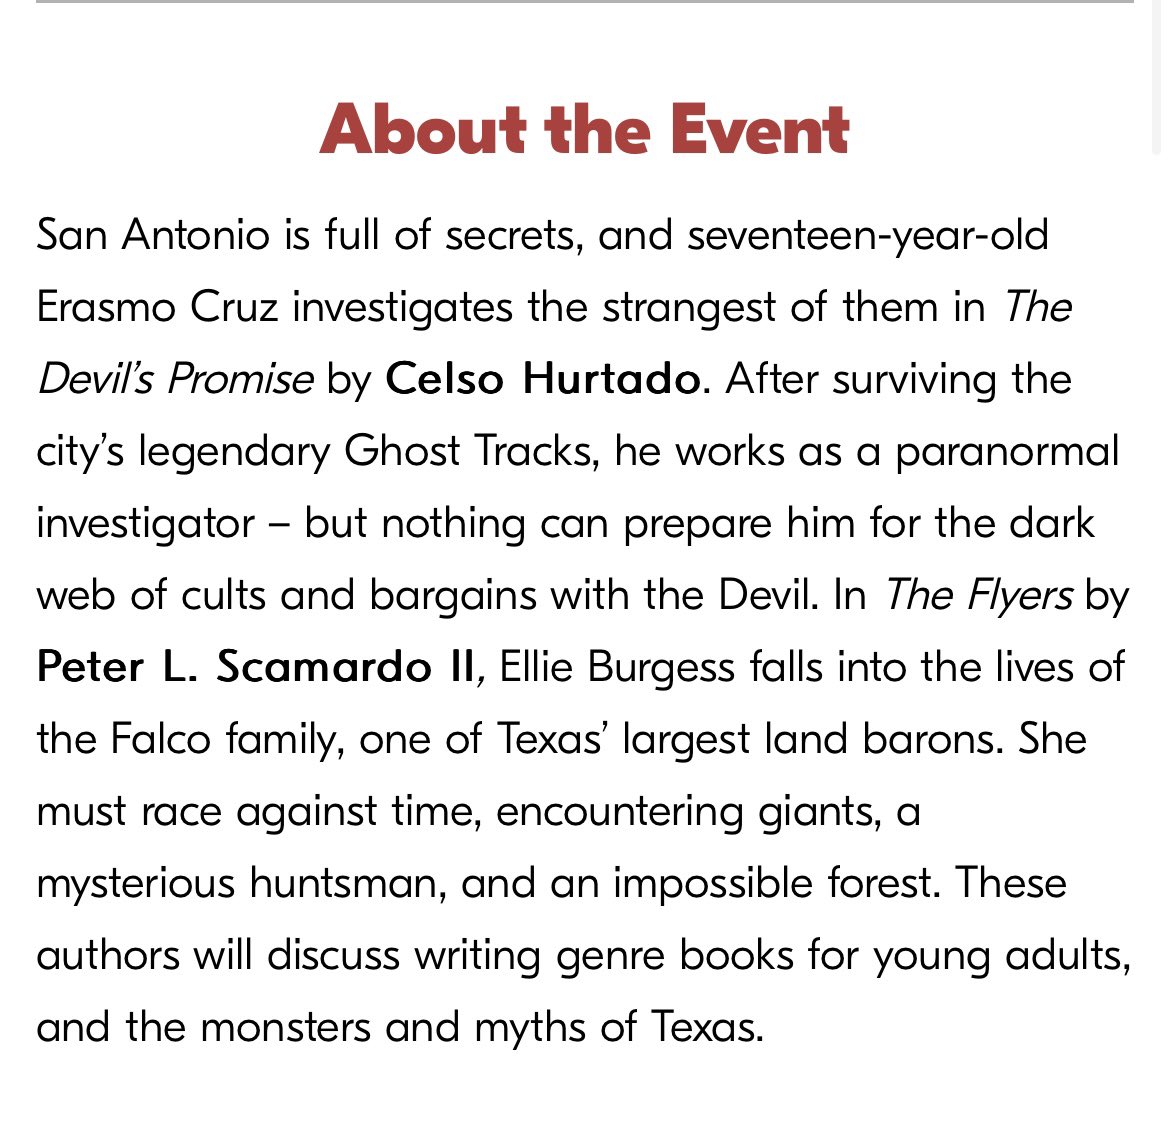 Excited to share I’ll be sharing a panel with @CelsoHurtadoJr for the @SABookFestival! Swing by on April 13 to hear us talk all things monsters, myths, and Texas twists!